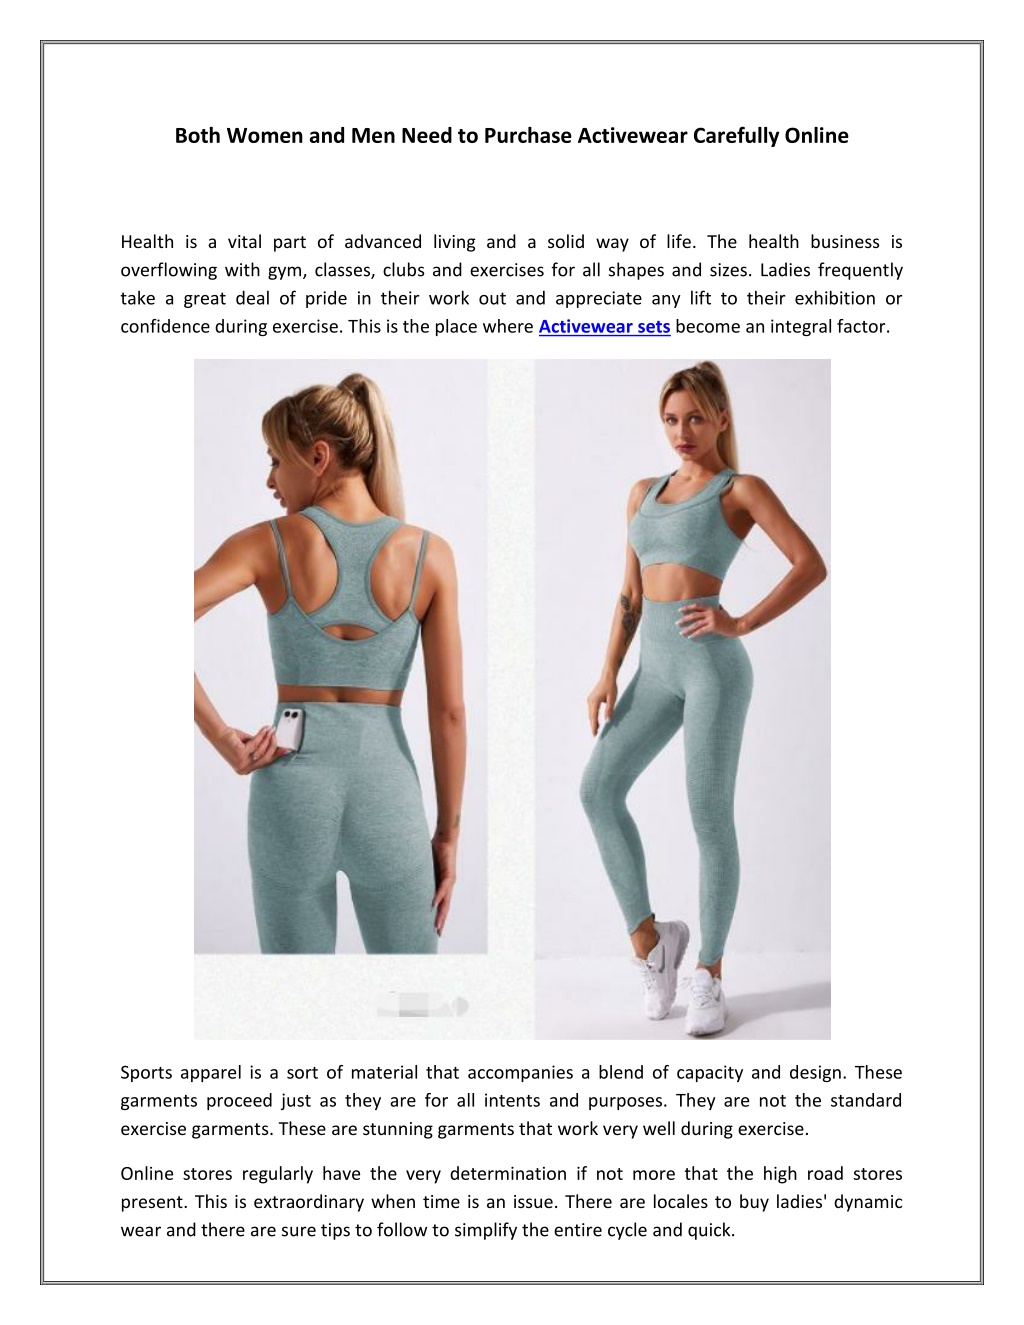 PPT - Both Women and Men Need to Purchase Activewear Carefully Online ...